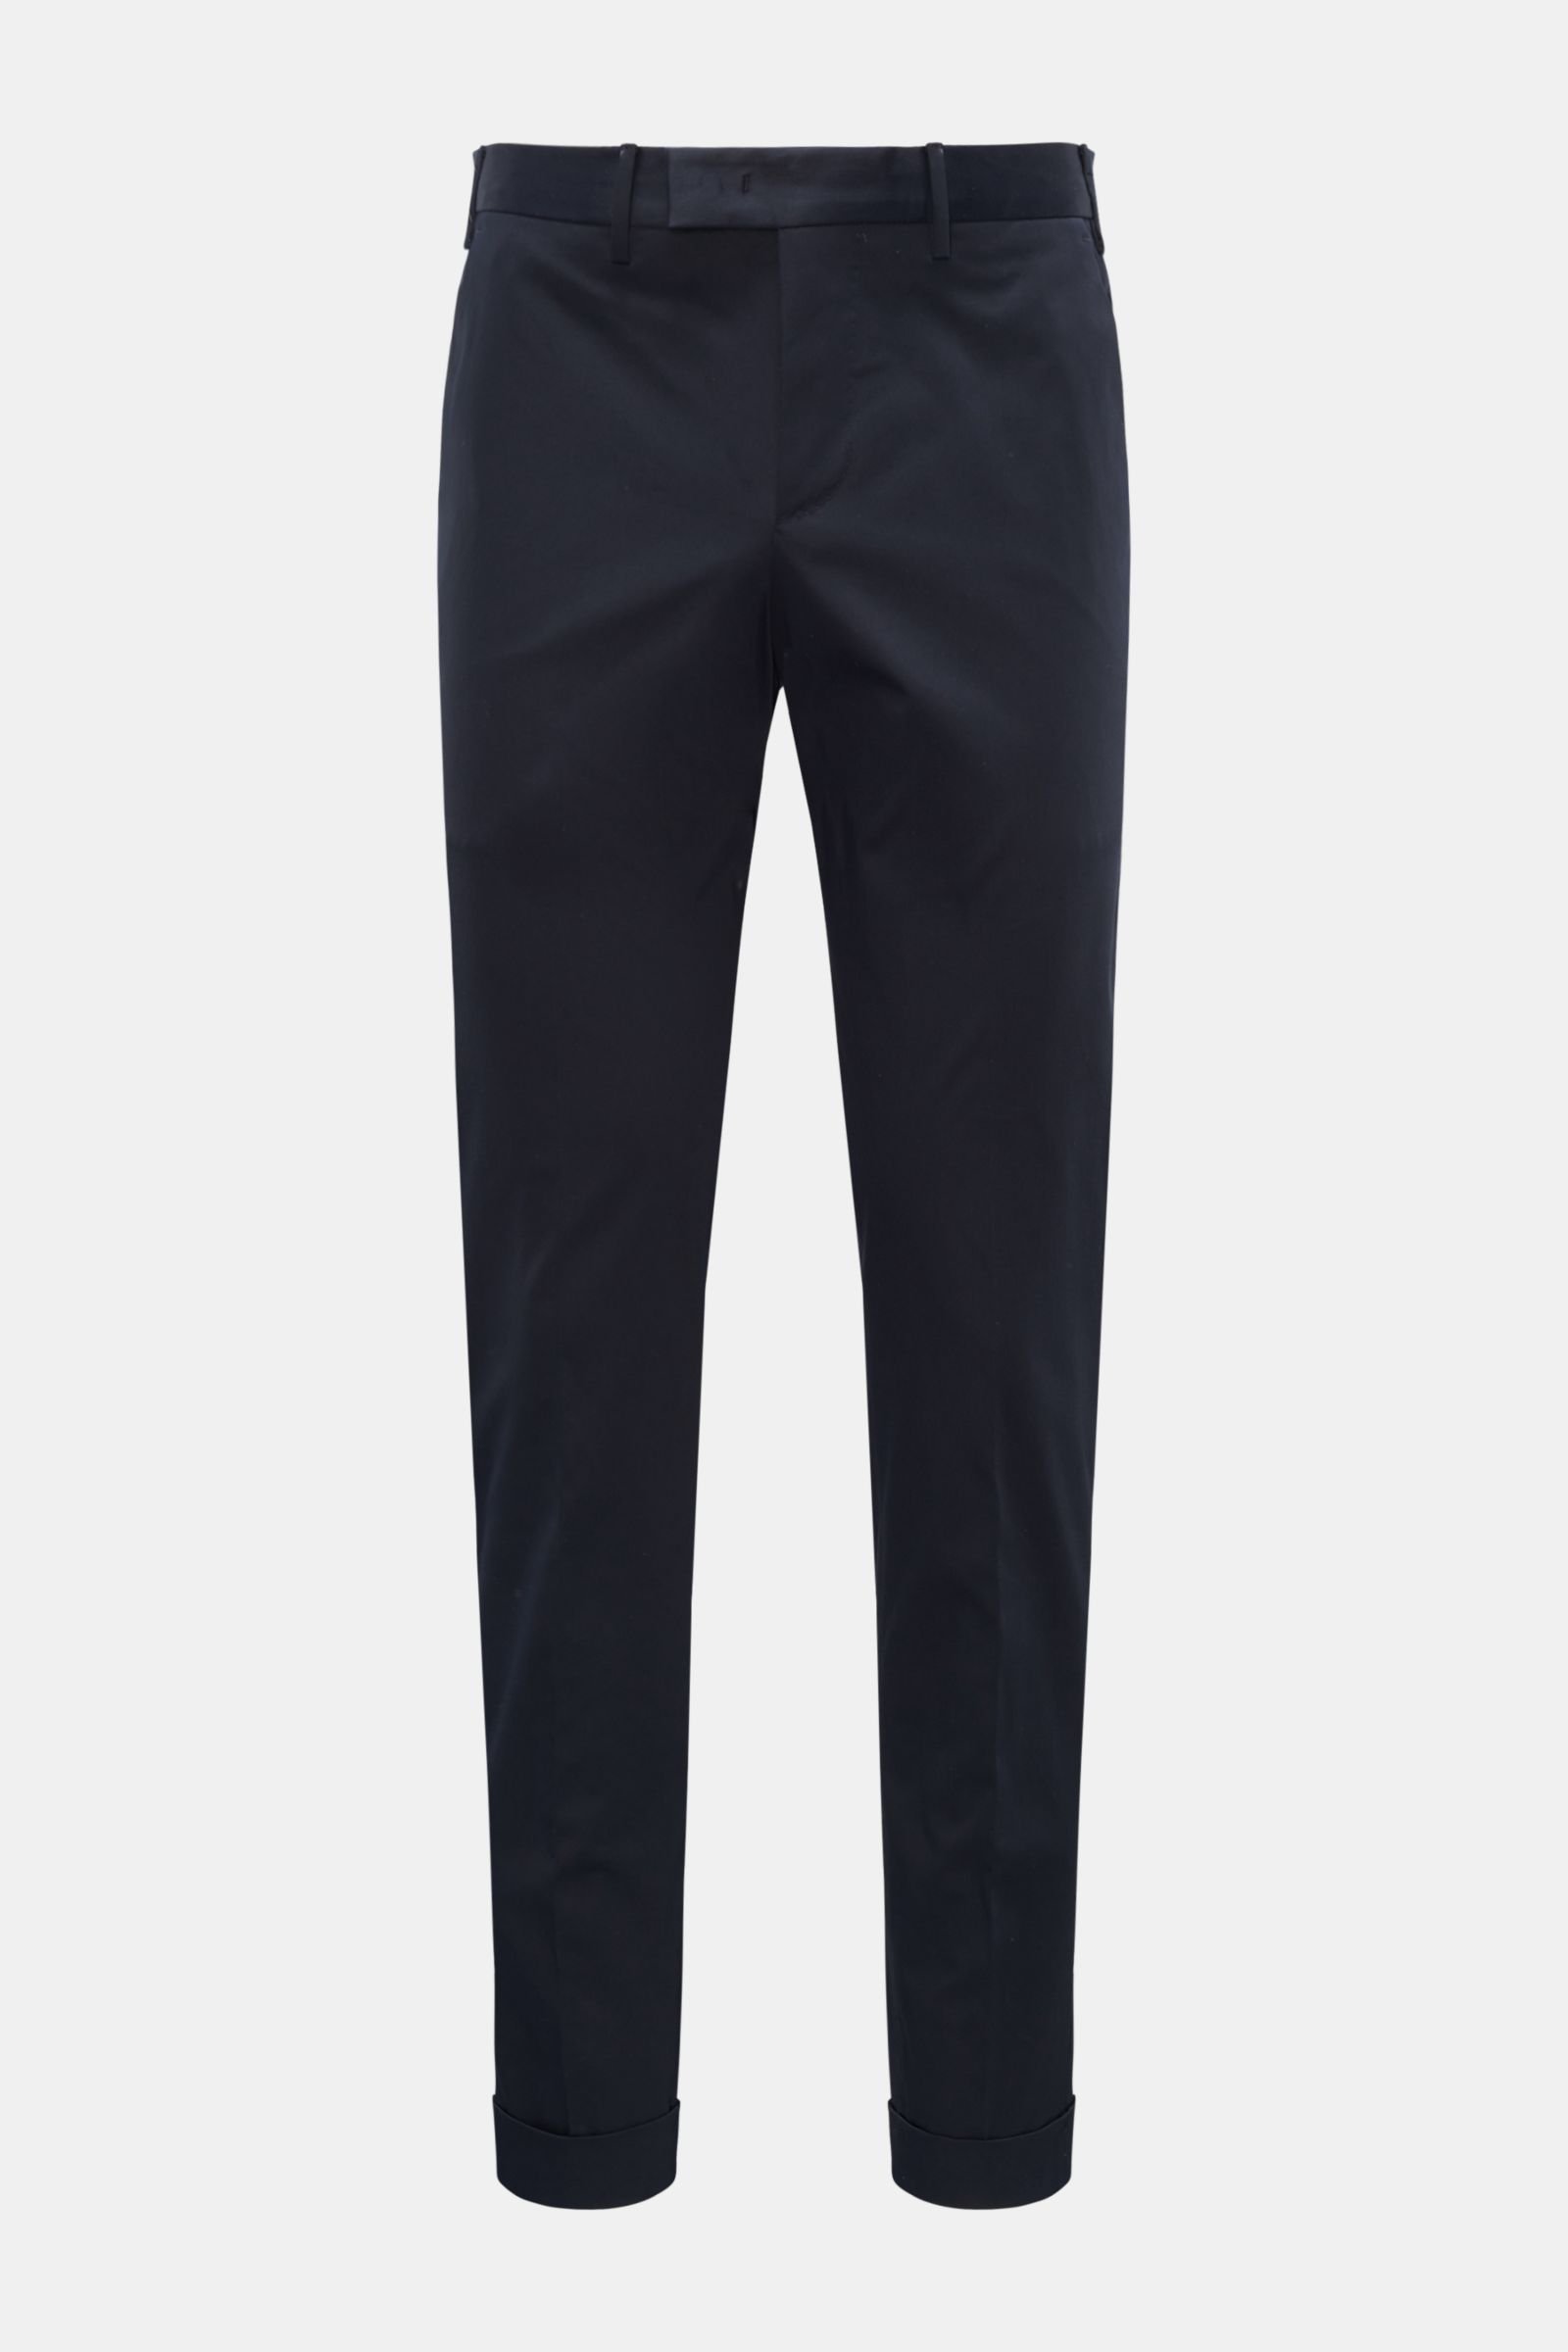 Cotton trousers 'Master Fit' dark navy